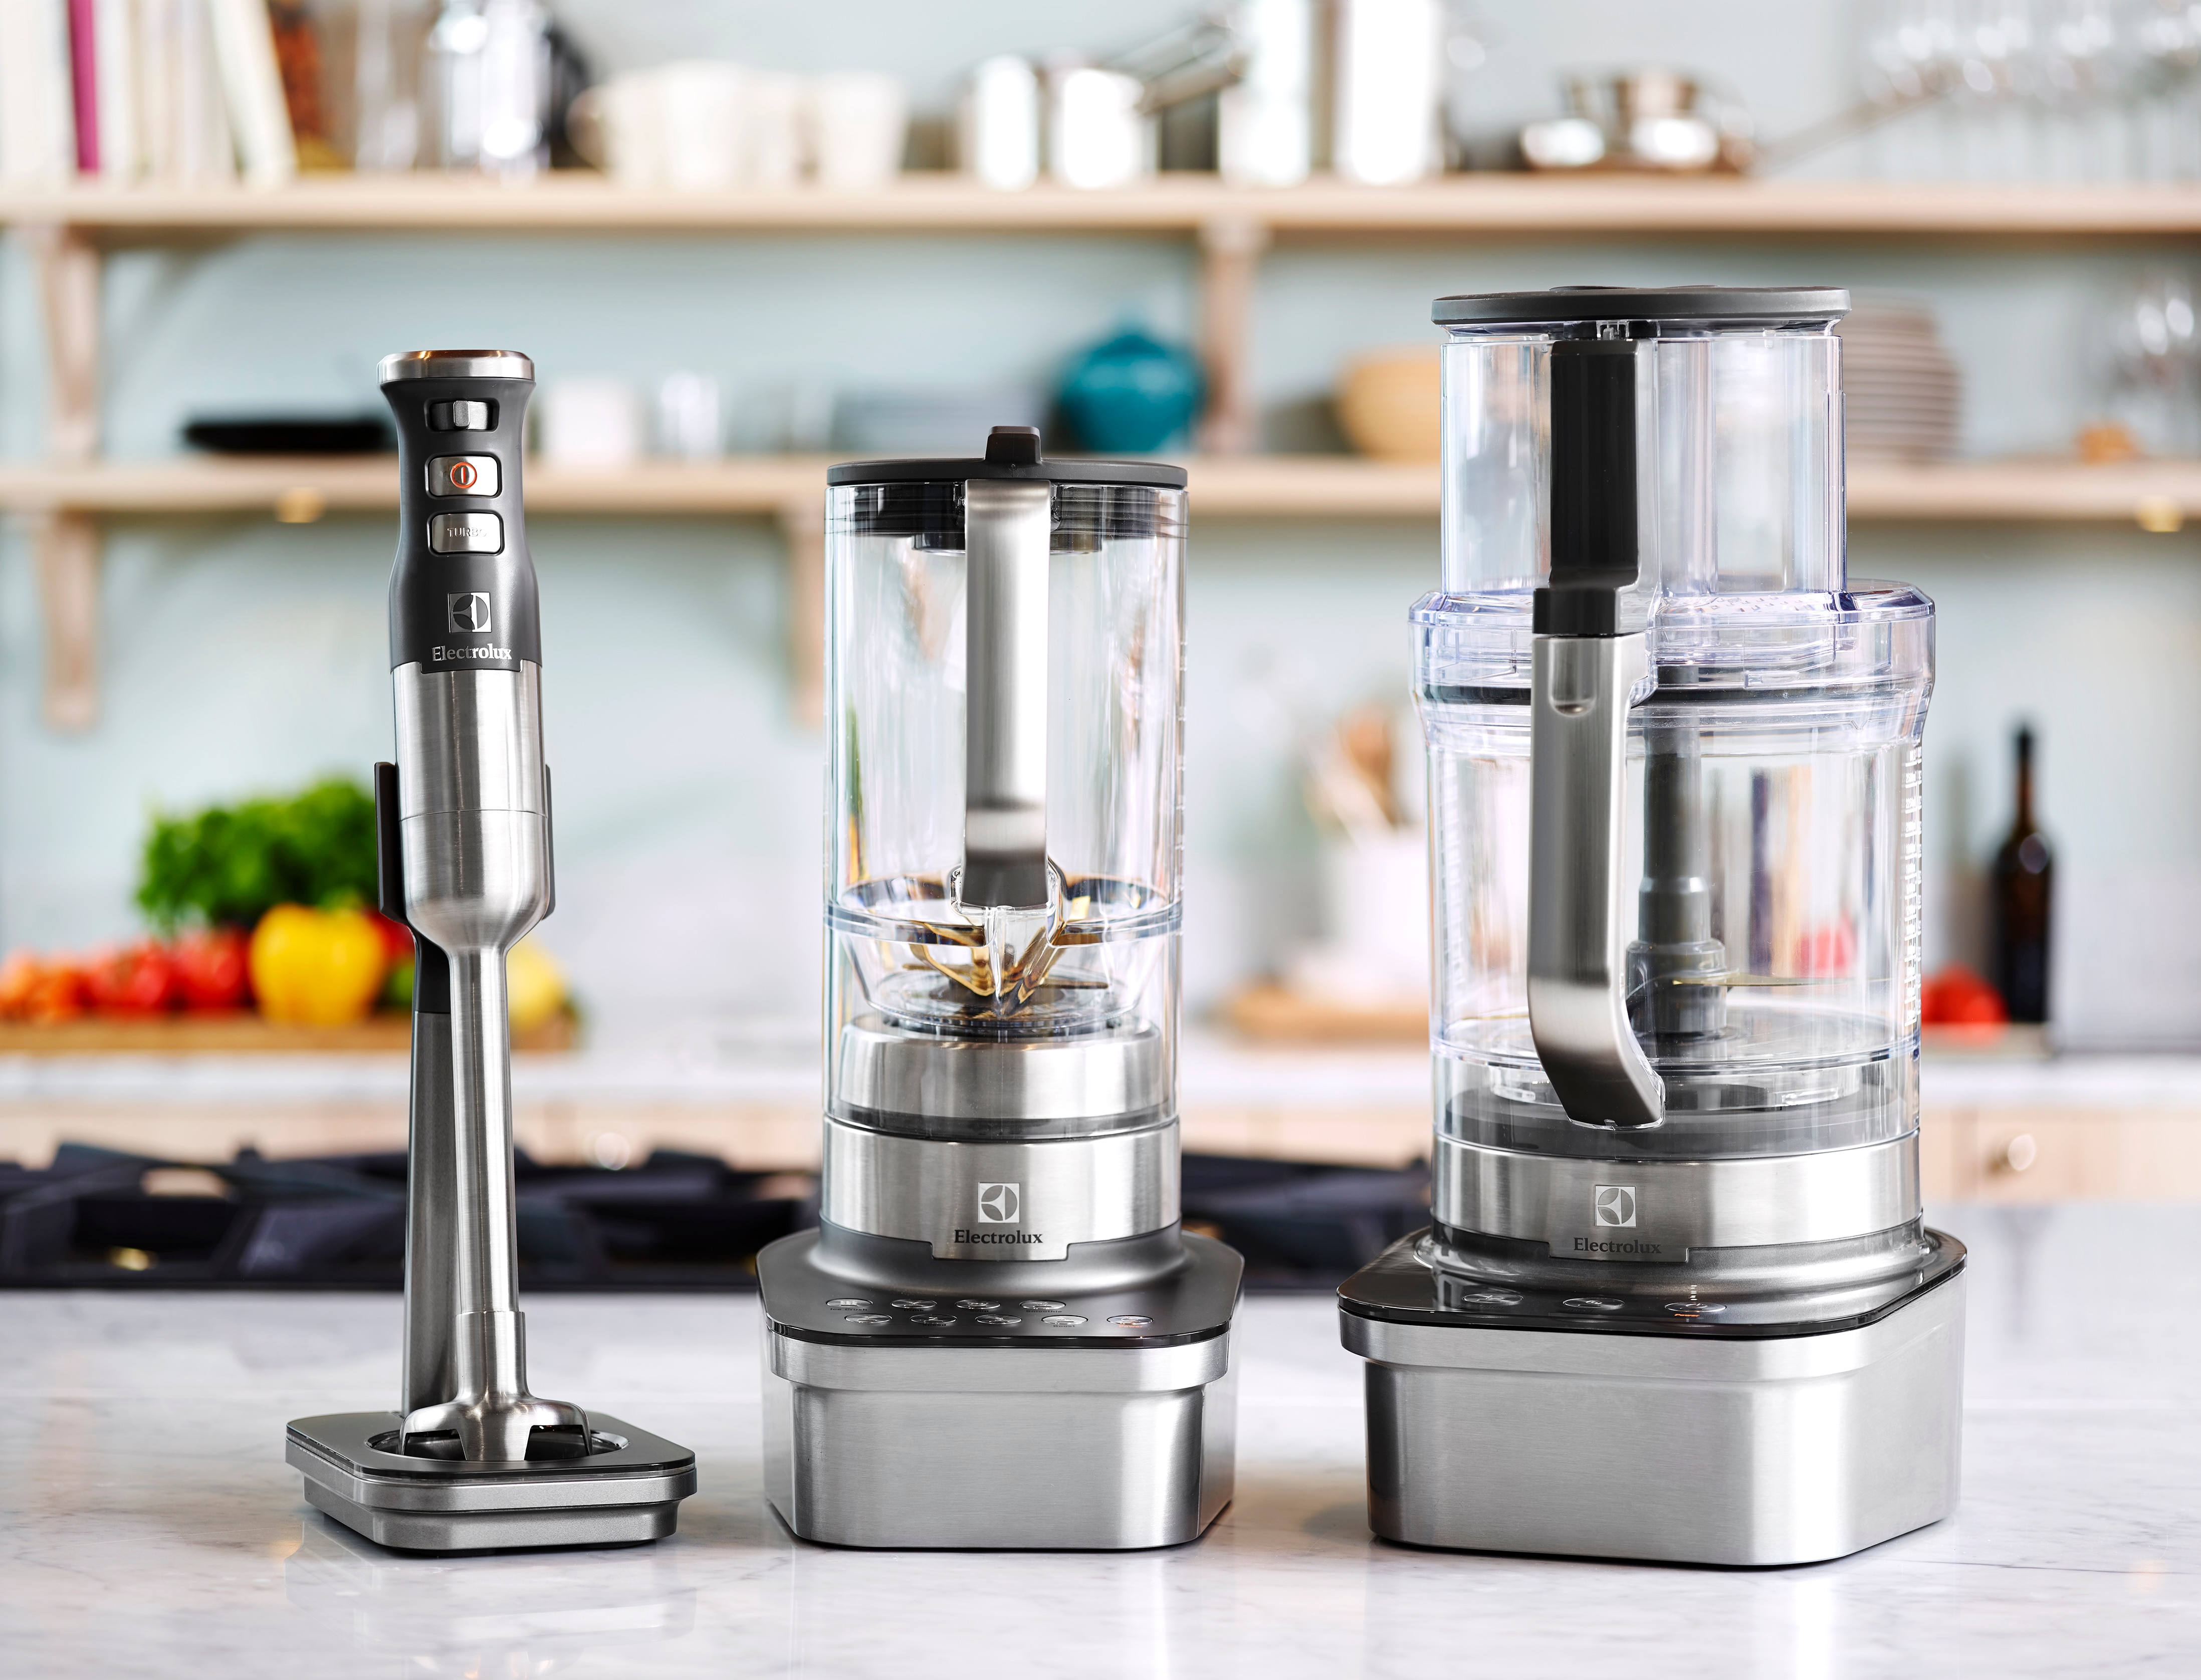 Electrolux launches Master 9 connected blender - Home Appliances World